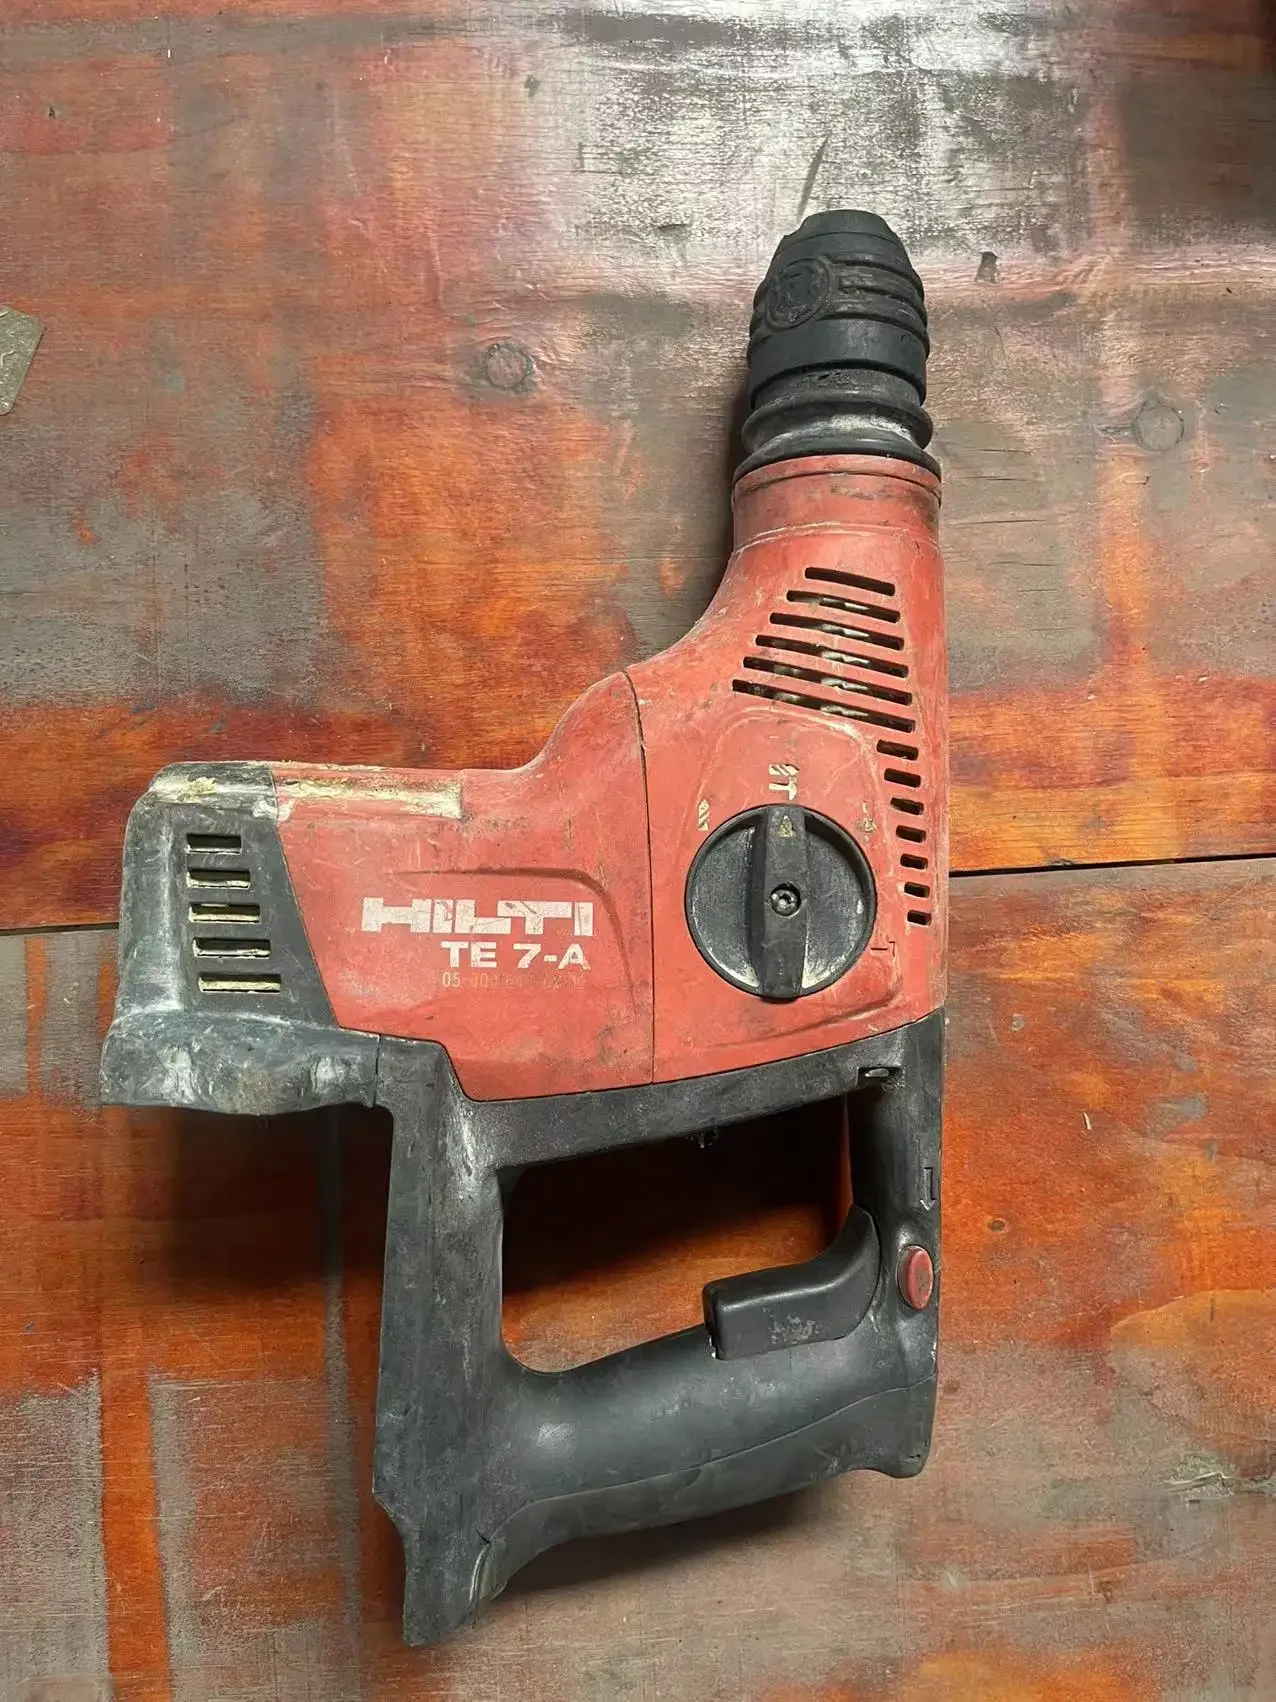 Hilti TE 7-A 36 Heavy Duty HAMMER .USED.SECOND HAND used hilti 14 4v 1 6ah in perfect working order second hand